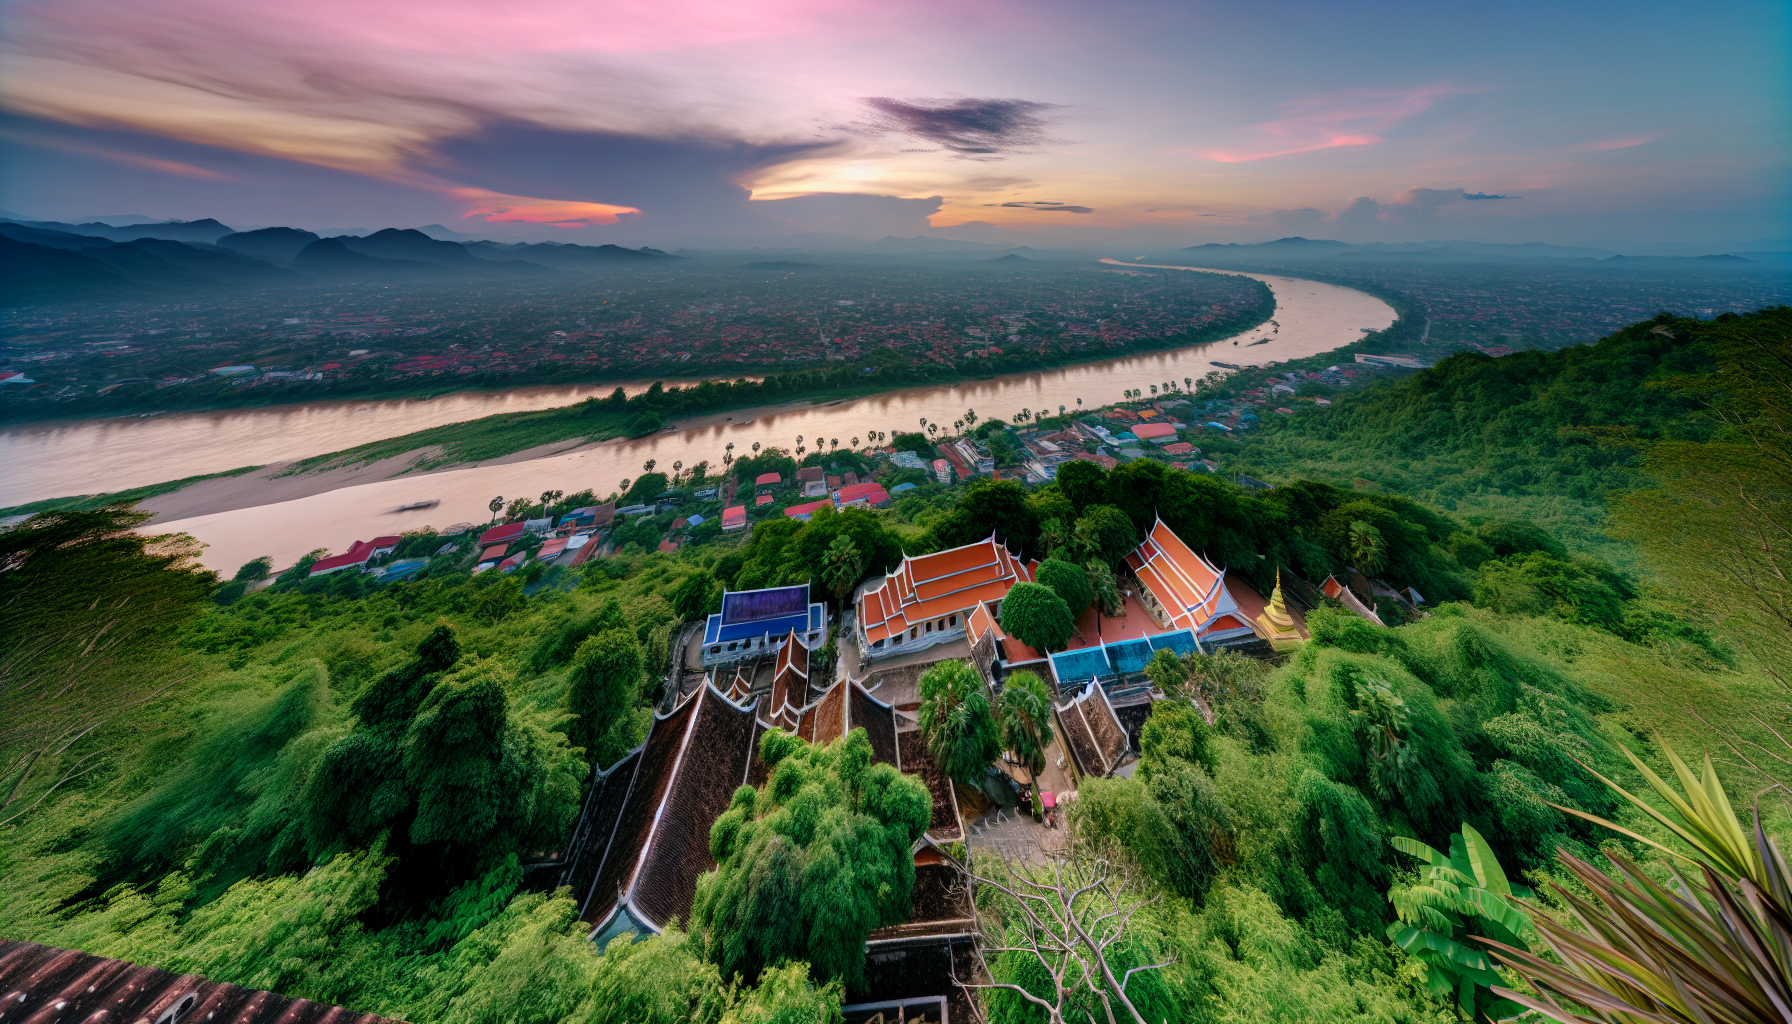 Panoramic view from Mount Phousi overlooking Luang Prabang and the Mekong River